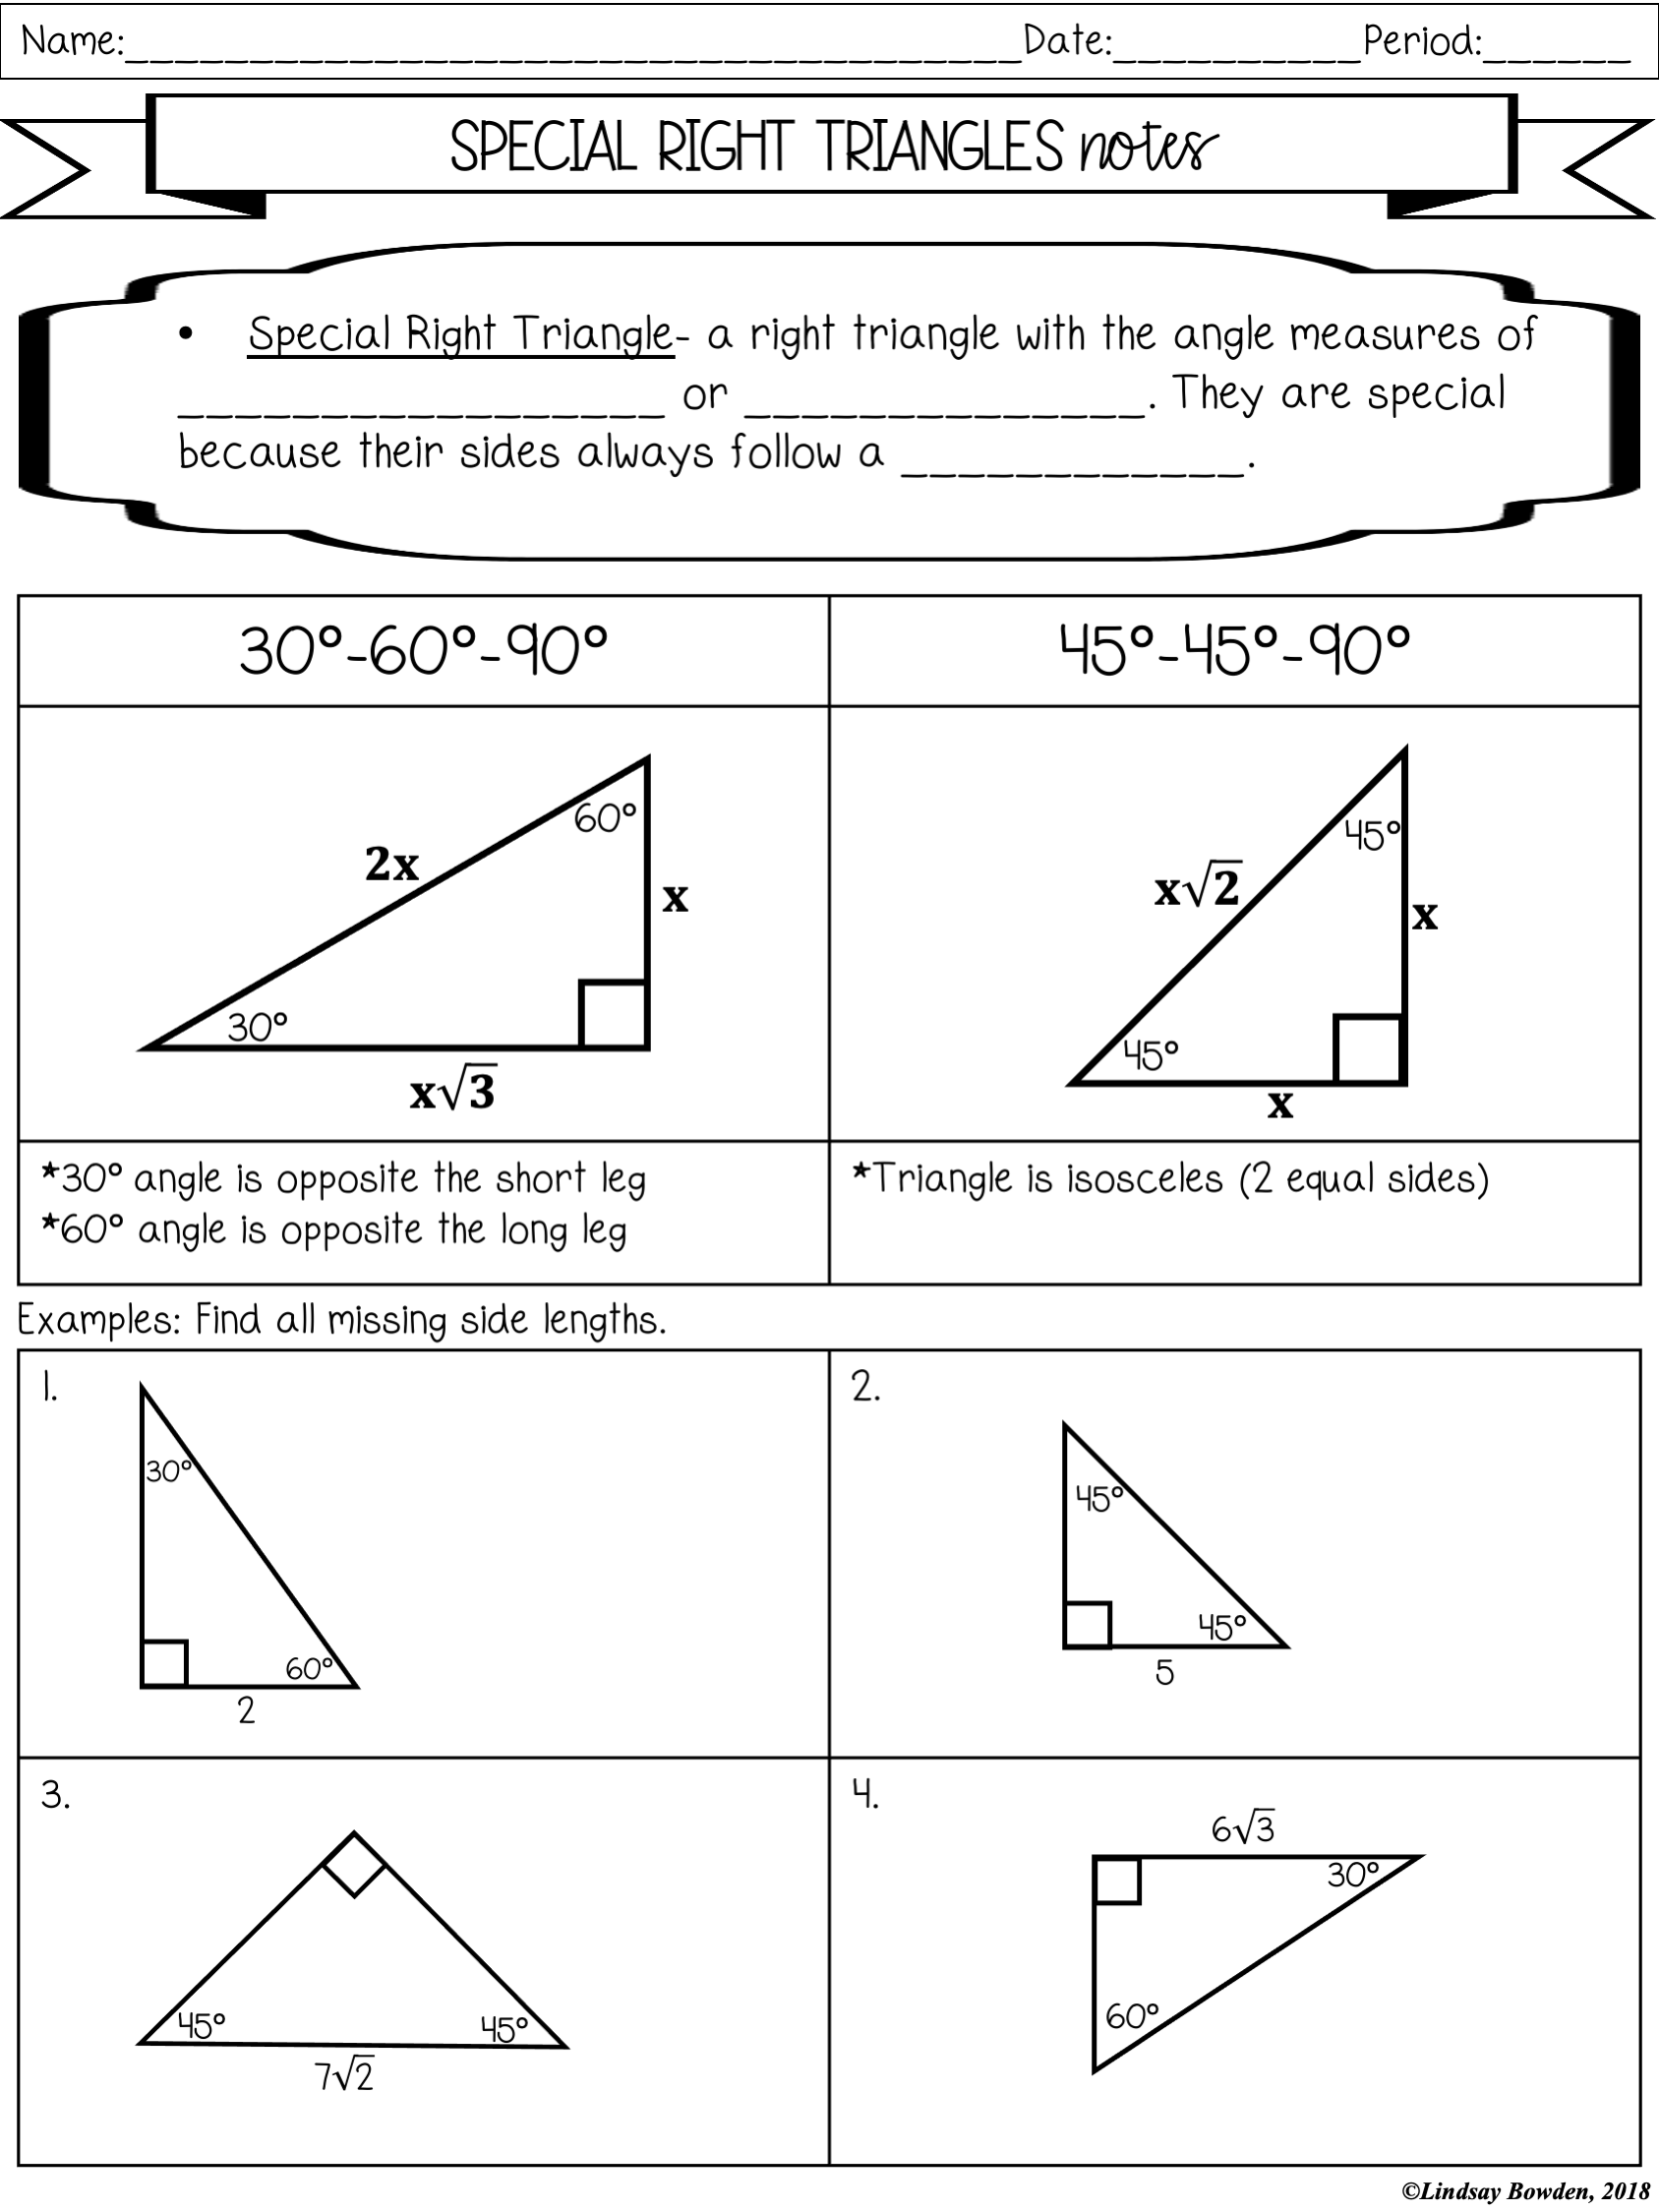 Special Right Triangles Notes and Worksheets - Lindsay Bowden With Special Right Triangles Practice Worksheet